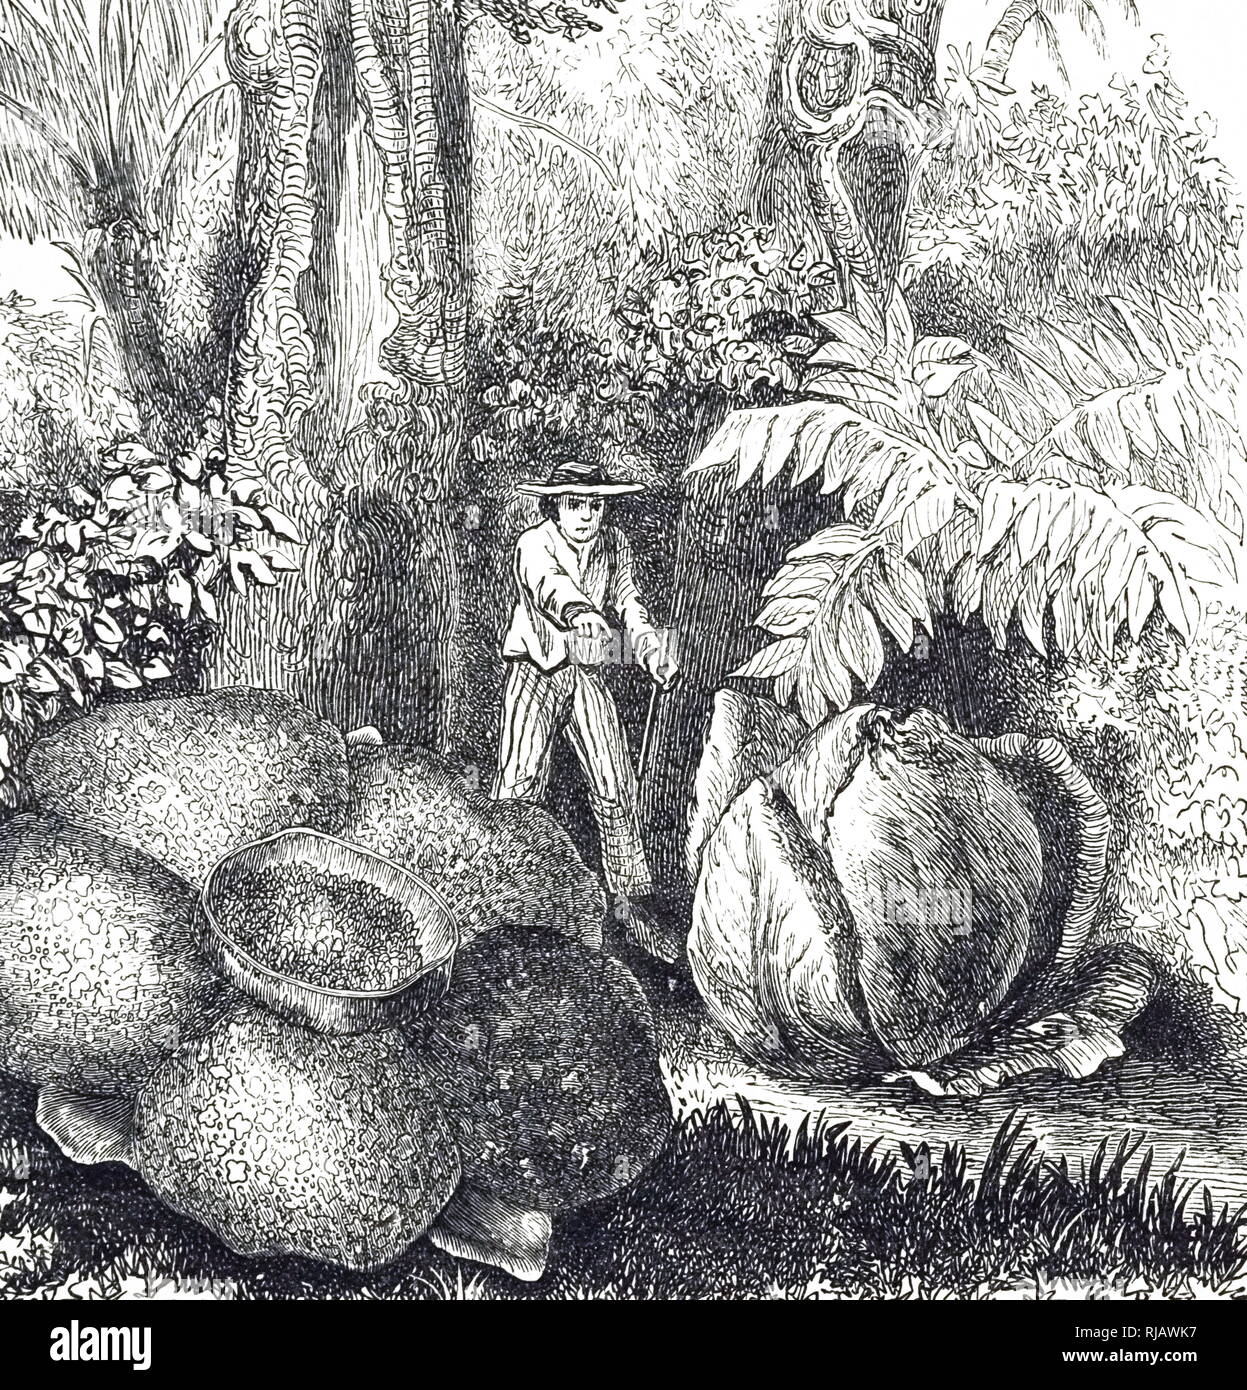 An engraving depicting the flower and bud of Rafflesia arnoldii, a ...